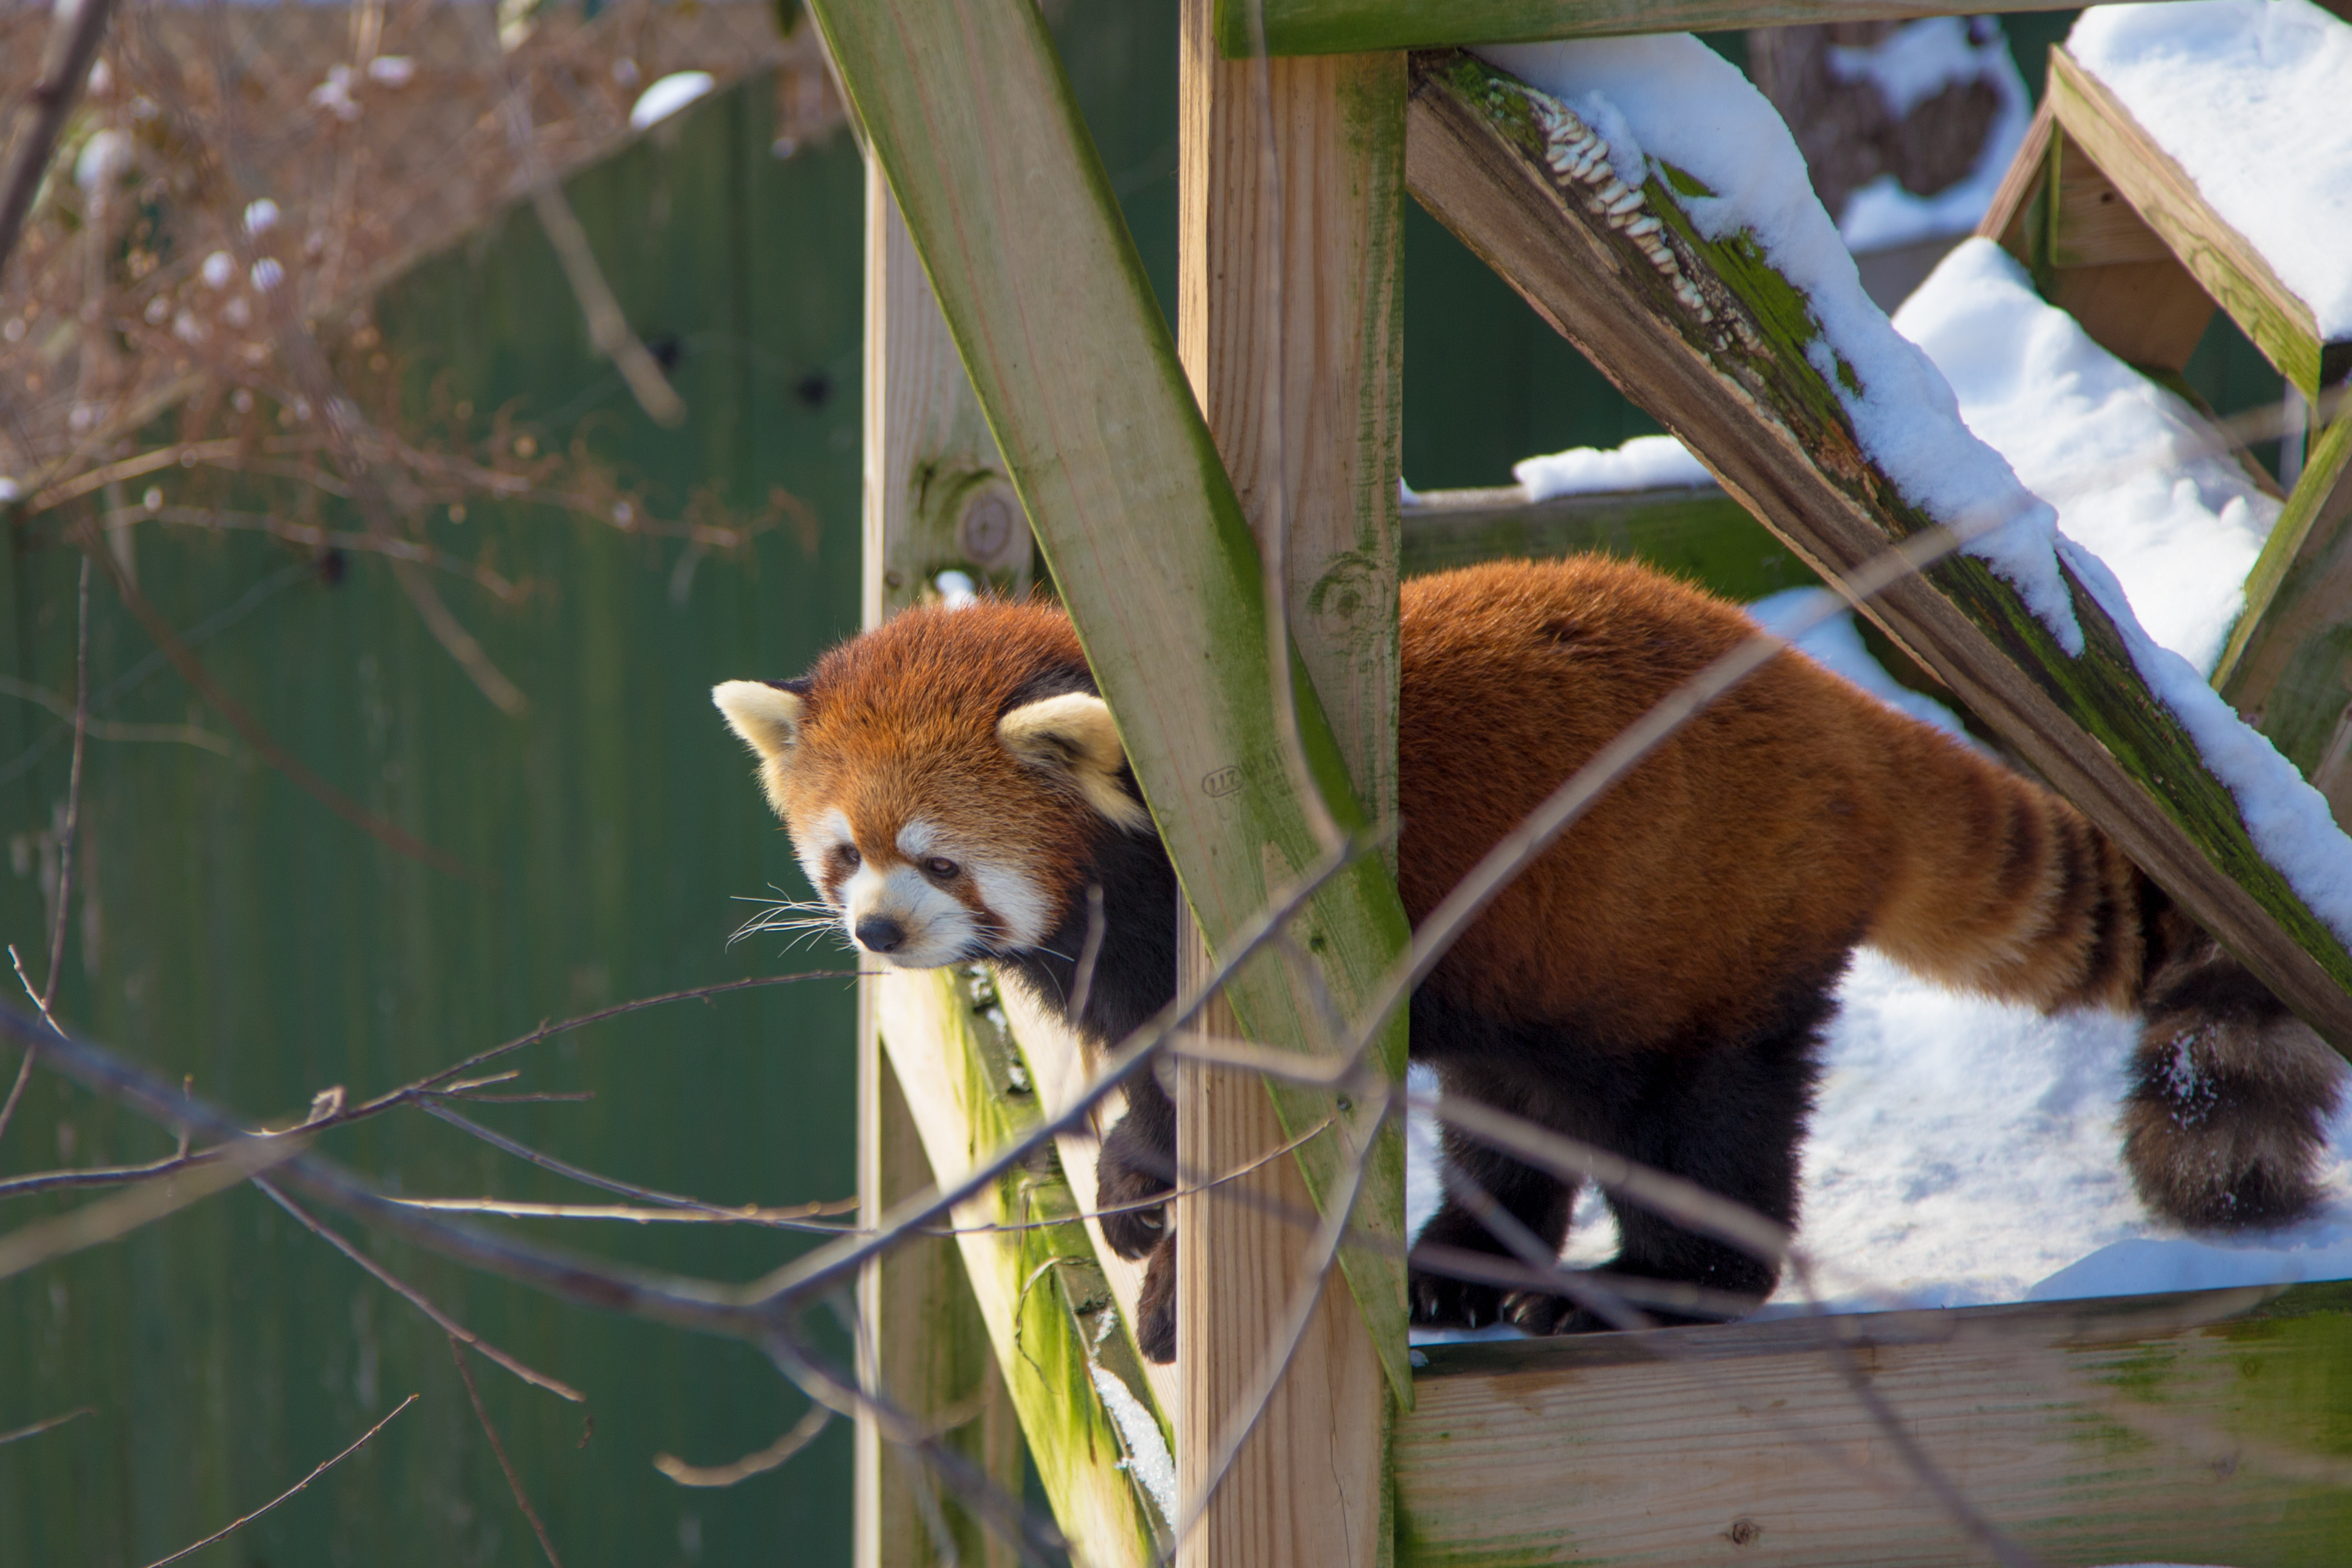 Red Panda between wood posts at the Roger Williams Park Zoo